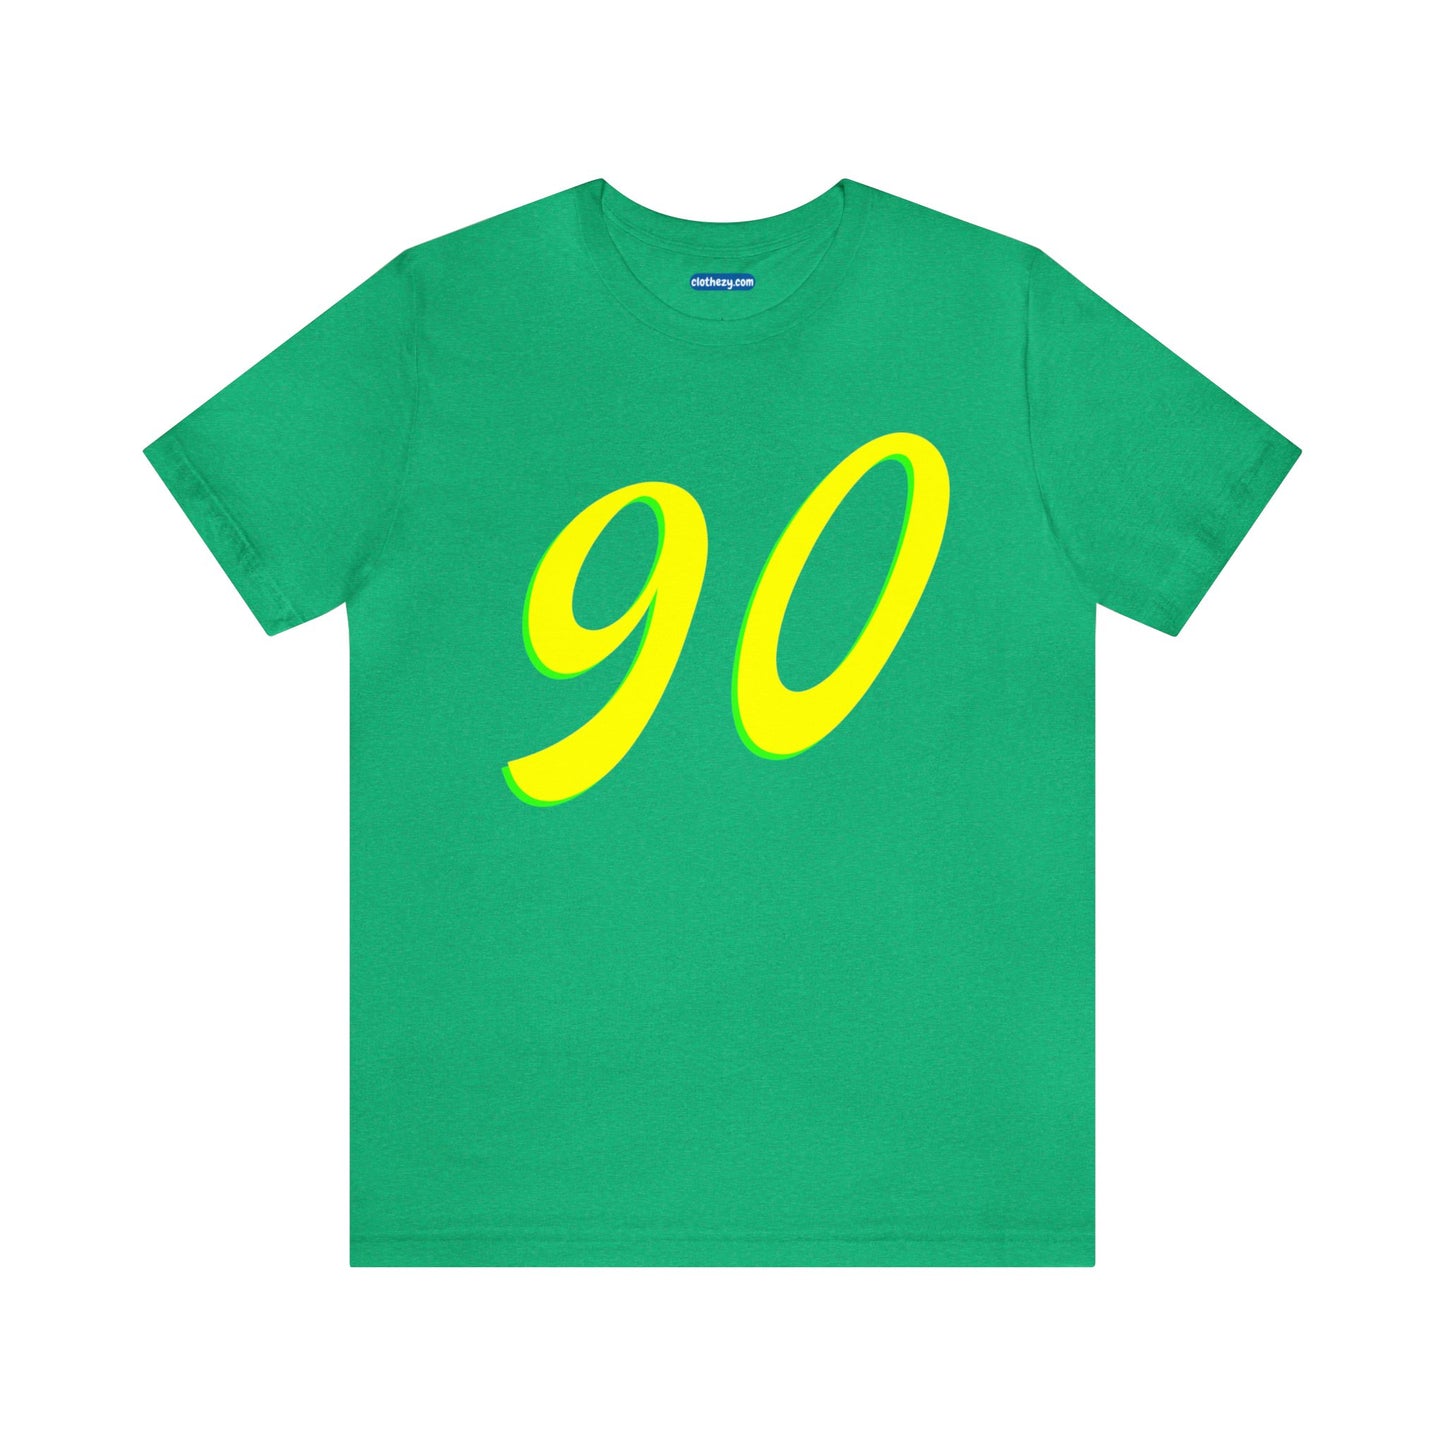 Number 90 Design - Soft Cotton Tee for birthdays and celebrations, Gift for friends and family, Multiple Options by clothezy.com in Royal Blue Heather Size Small - Buy Now